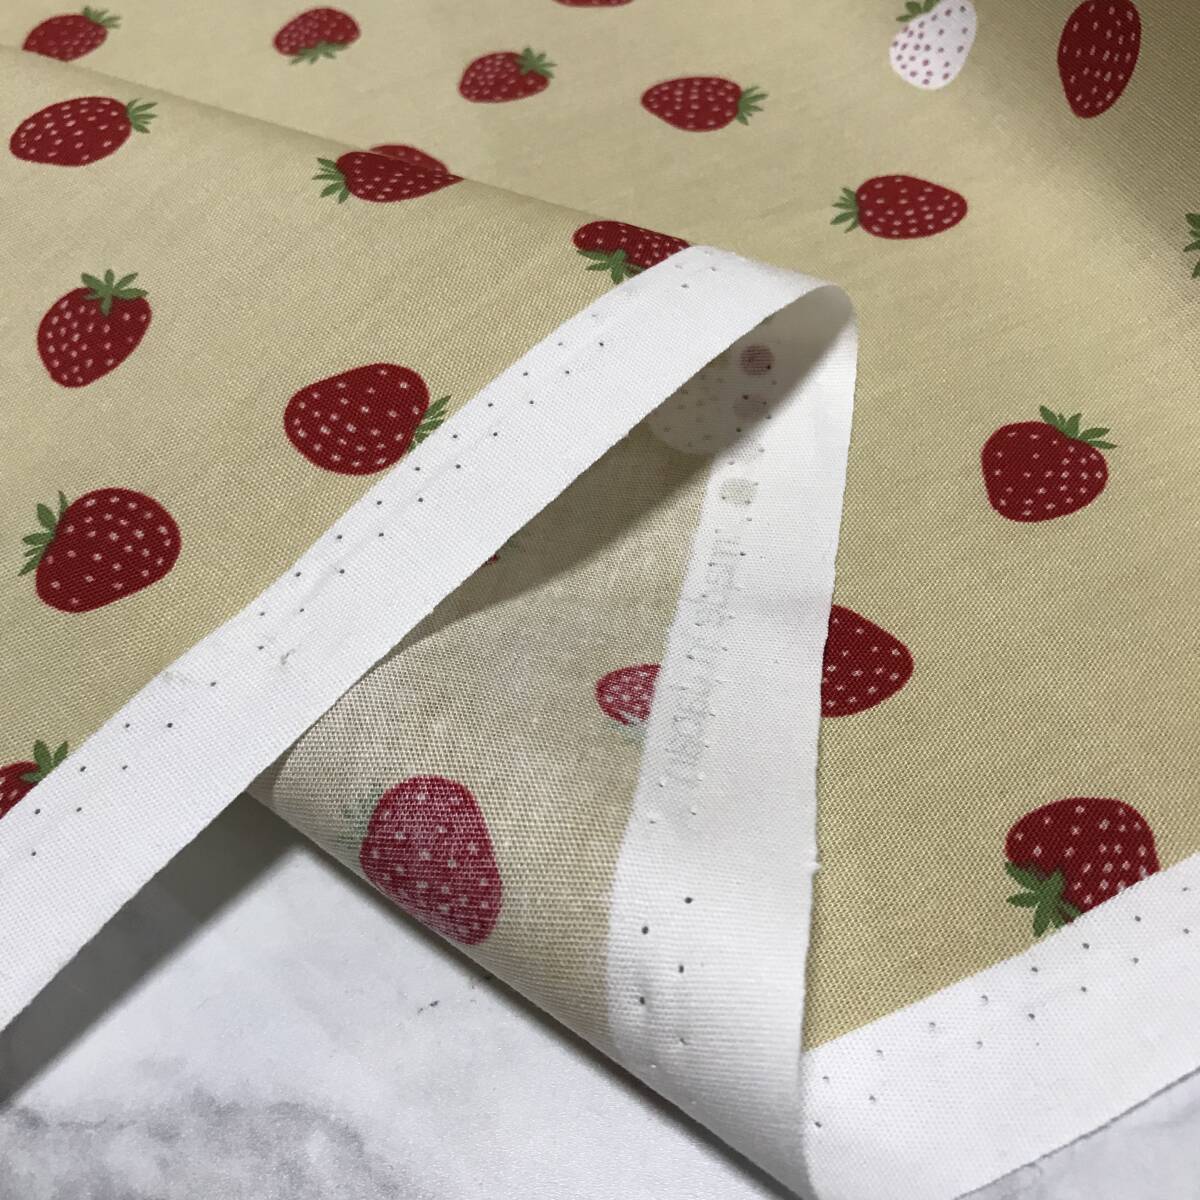  made in Japan 3m strawberry pattern ④si- chin g cloth is gire